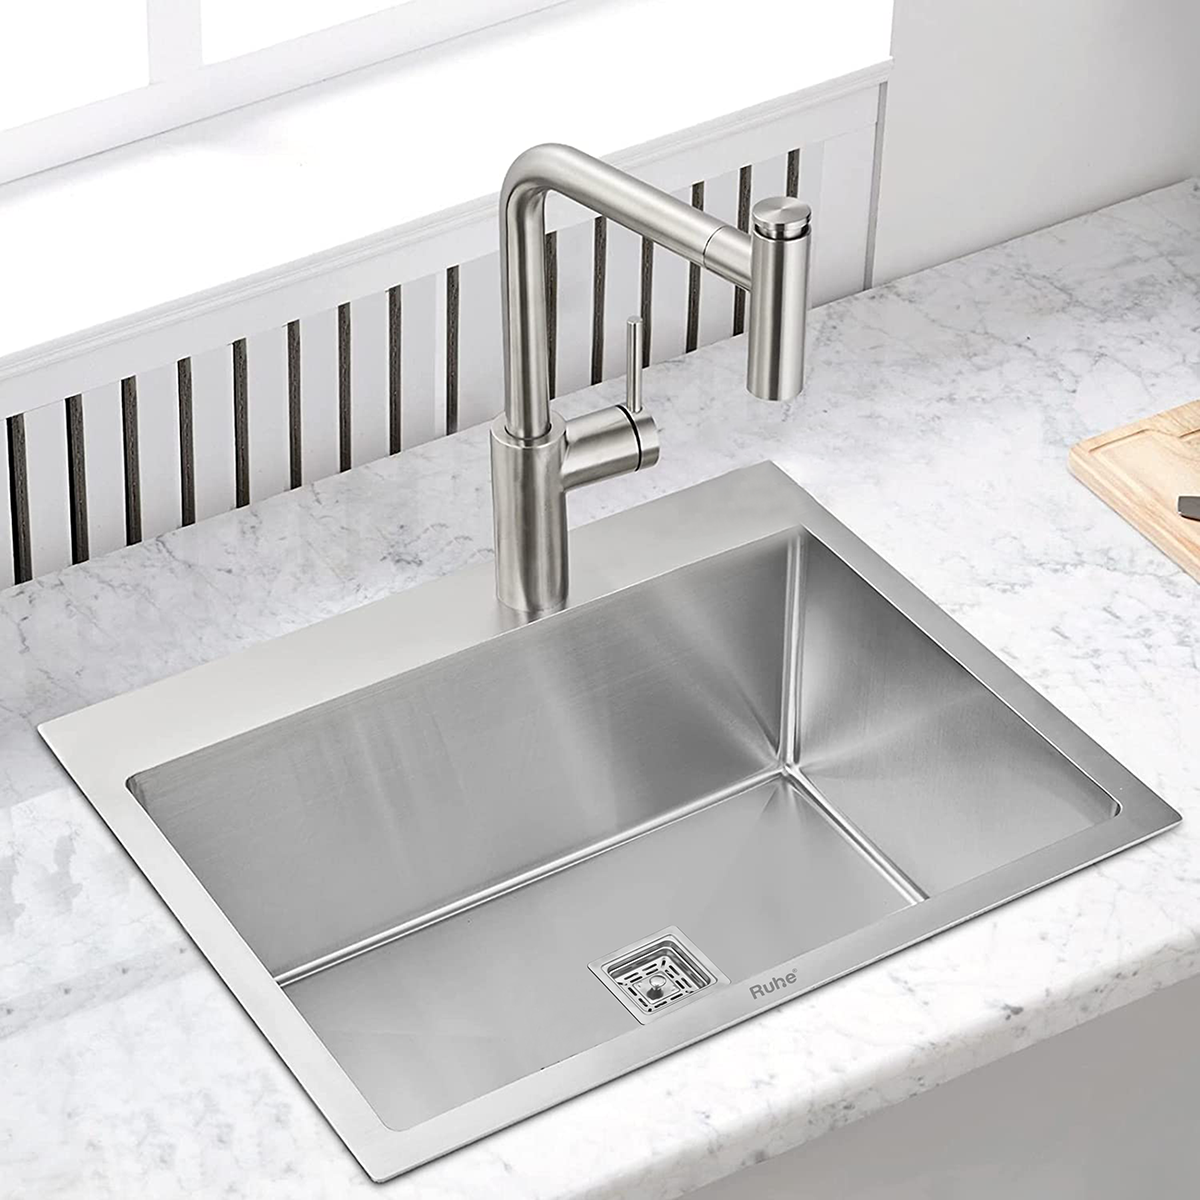 Handmade Single Bowl 304-Grade Kitchen Sink (21 x 18 x 10 Inches) with Tap Hole installed